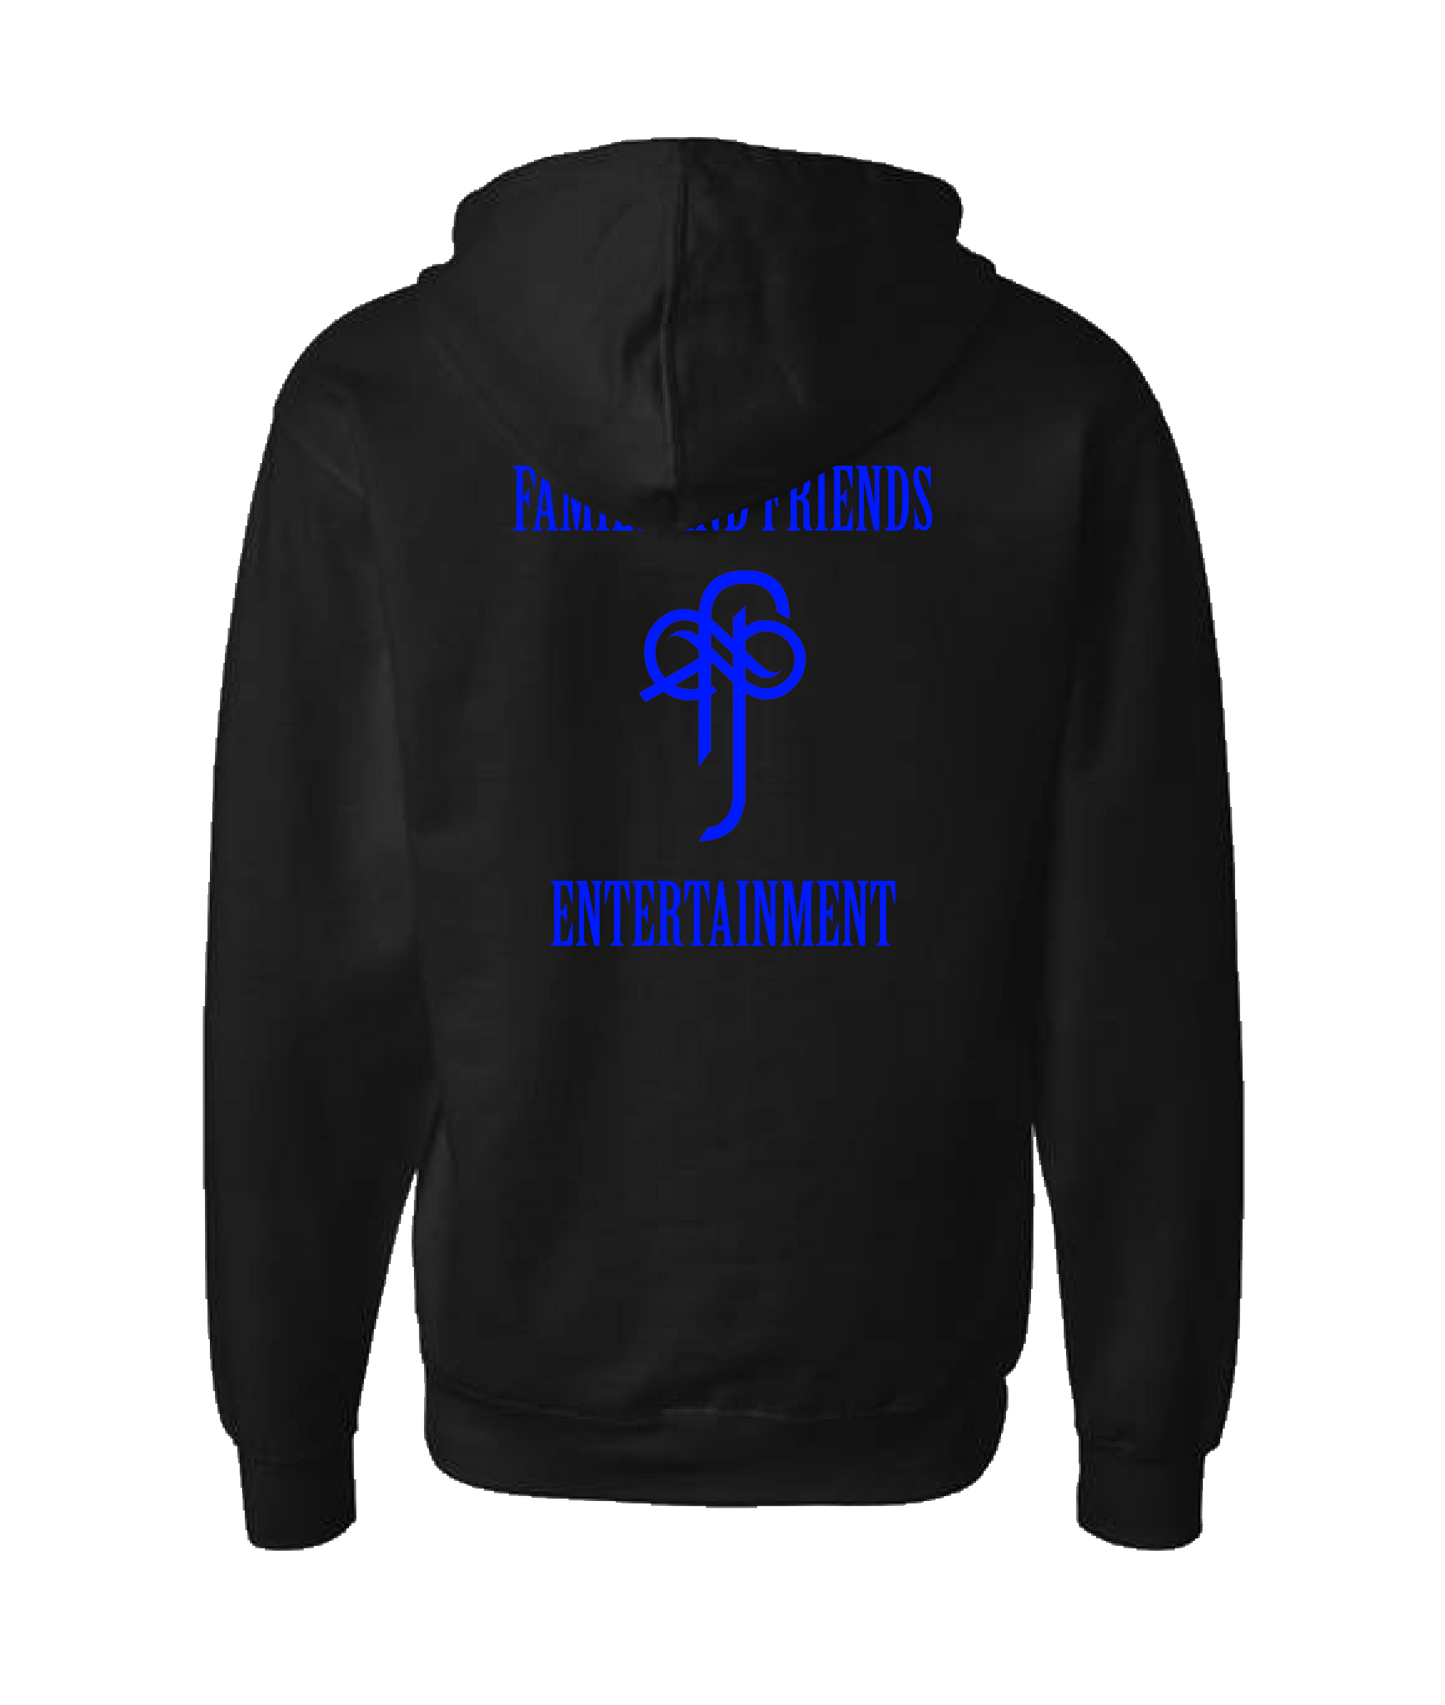 Sincrawford - Family and Friends Ent. (Blue) - Black Zip Up Hoodie